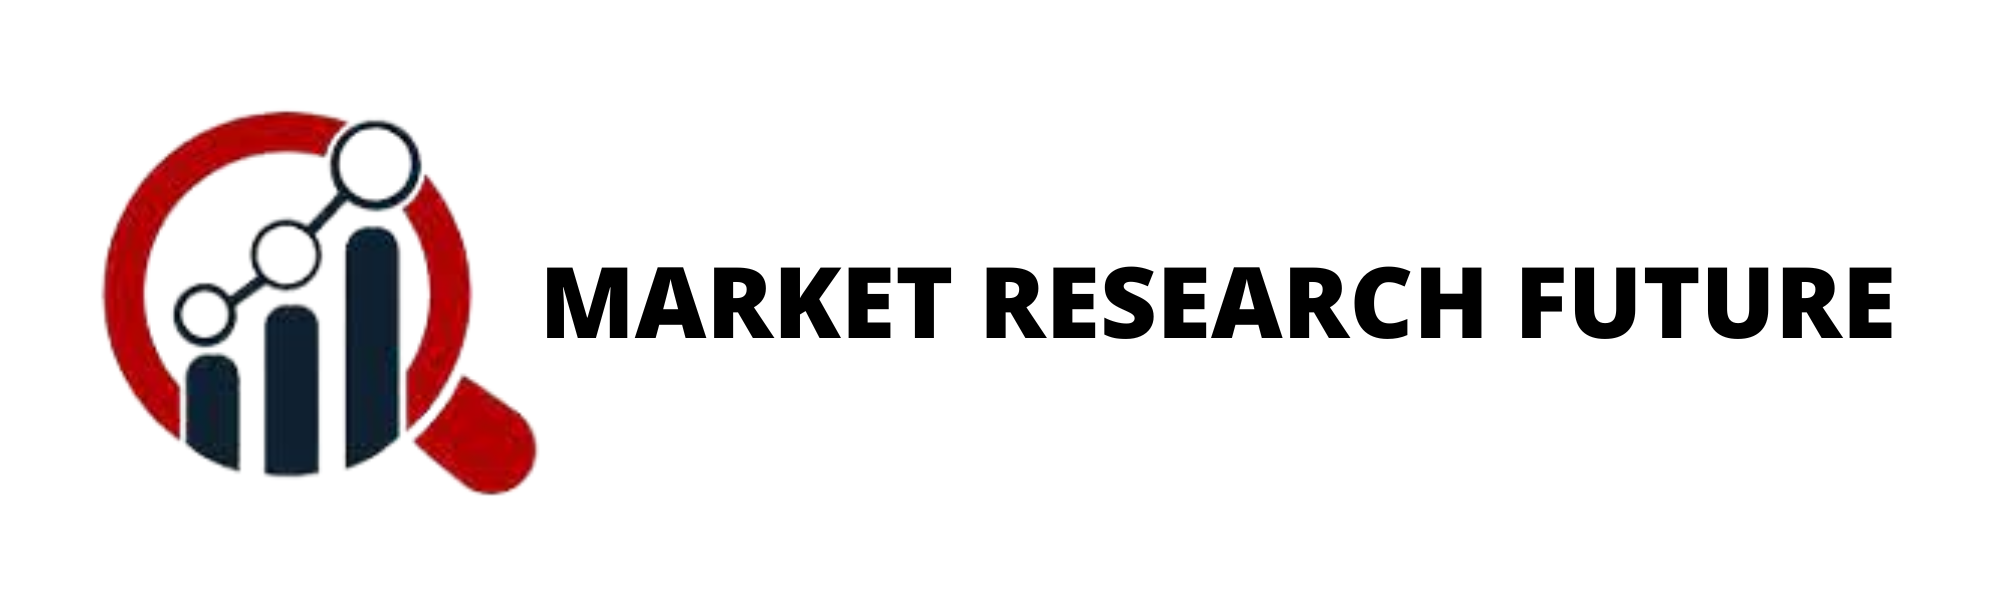 Spray Adhesive Market Size, will Hit Big Revenues In Future With...